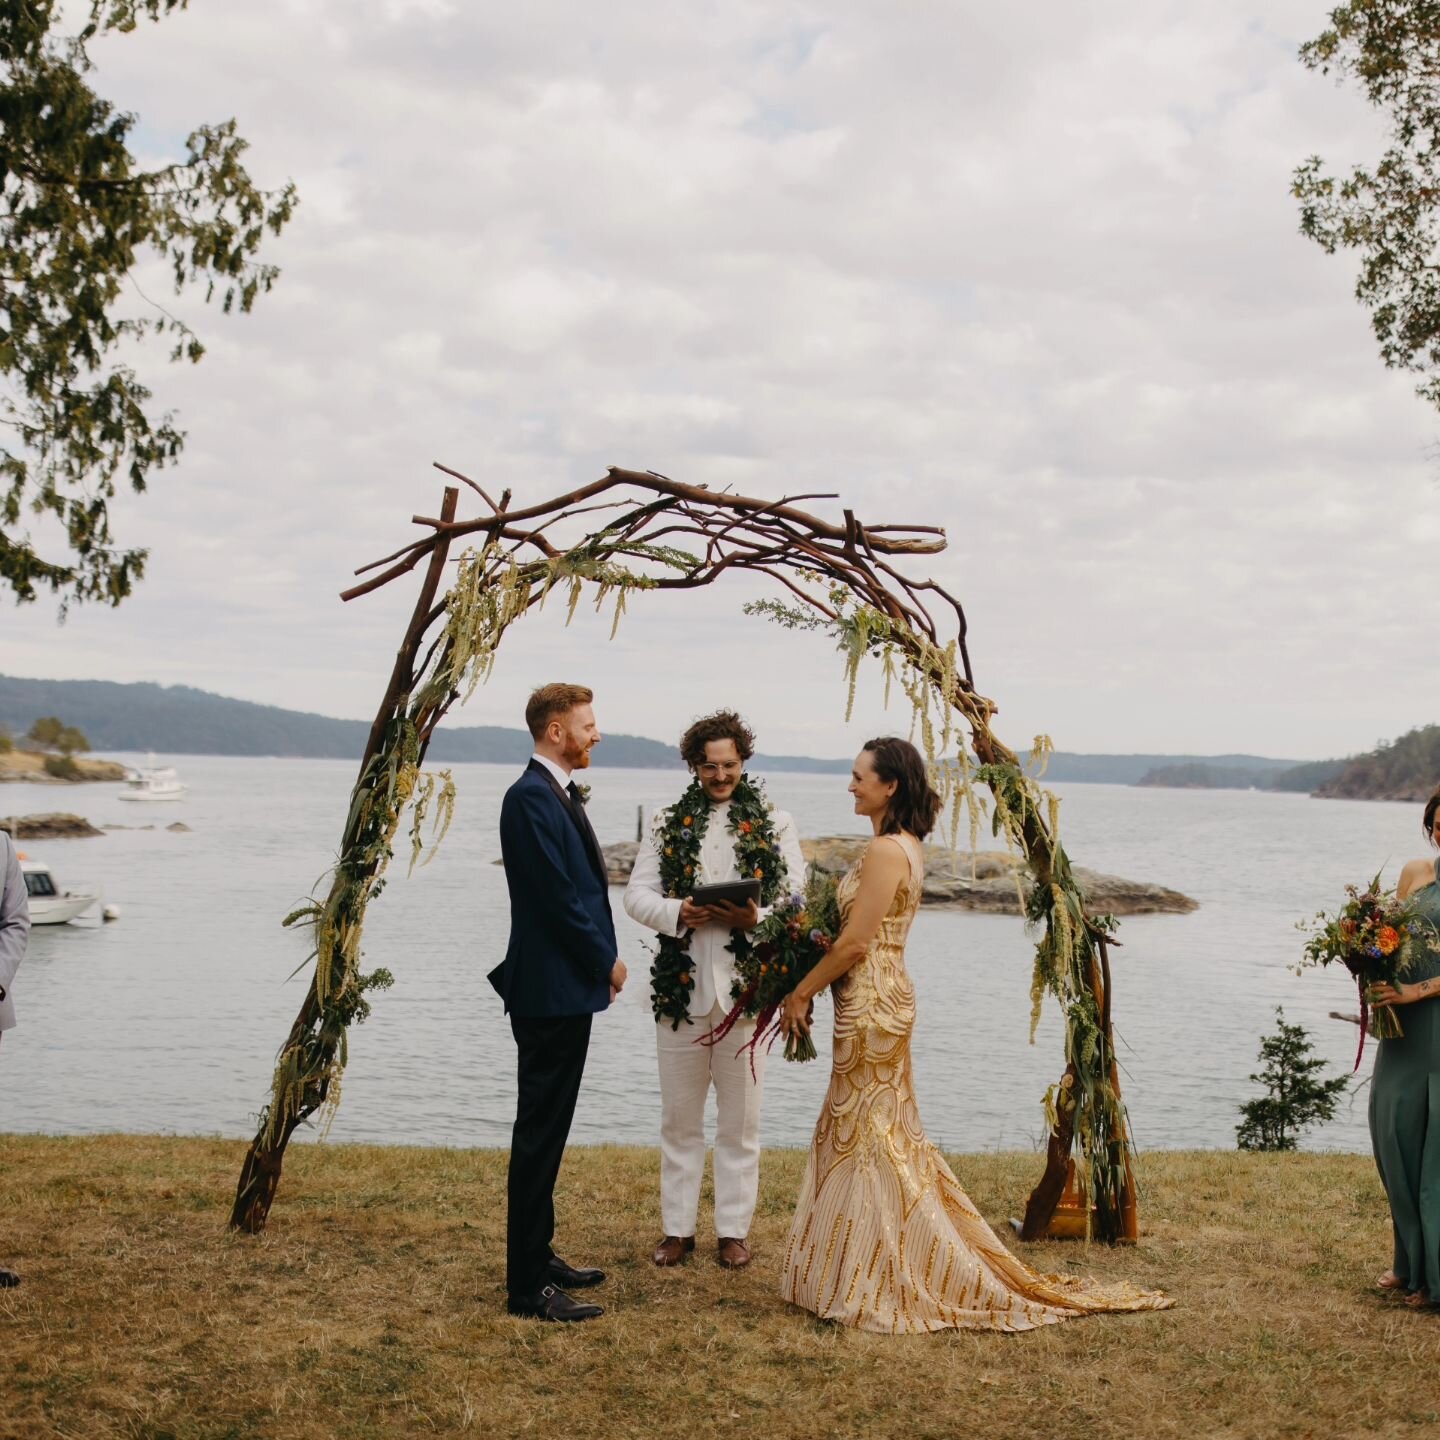 When an open field on Orcas becomes your personal wedding venue. 

We loved helping J &amp; G transform this field on the sound into a whimsical wedding where no white was to be had, even in her dress. 

Building a wedding on an island has similariti